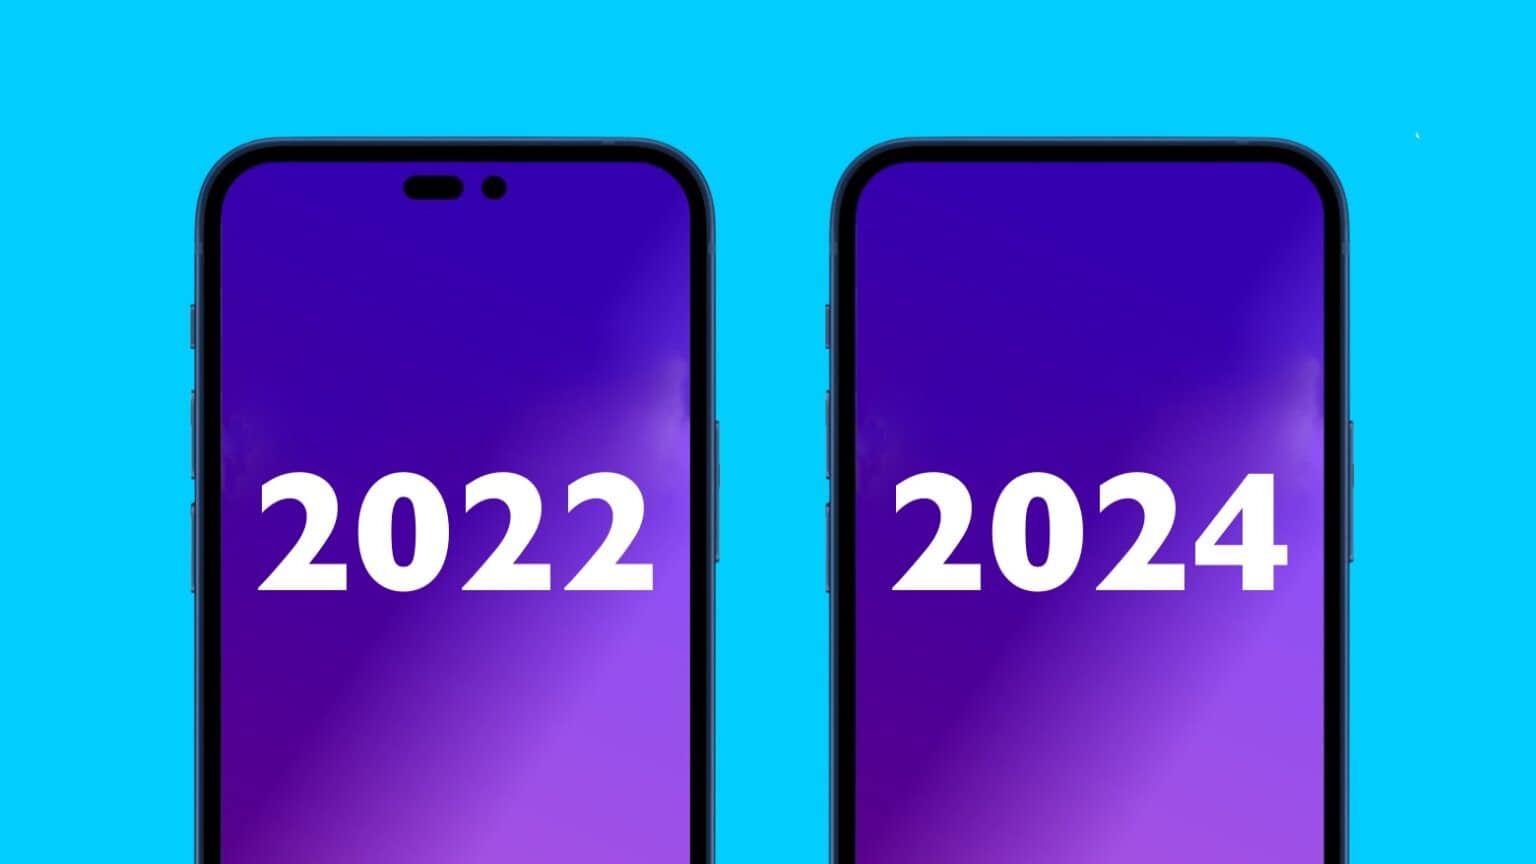 iPhone screen notch could finally disappear in 2024